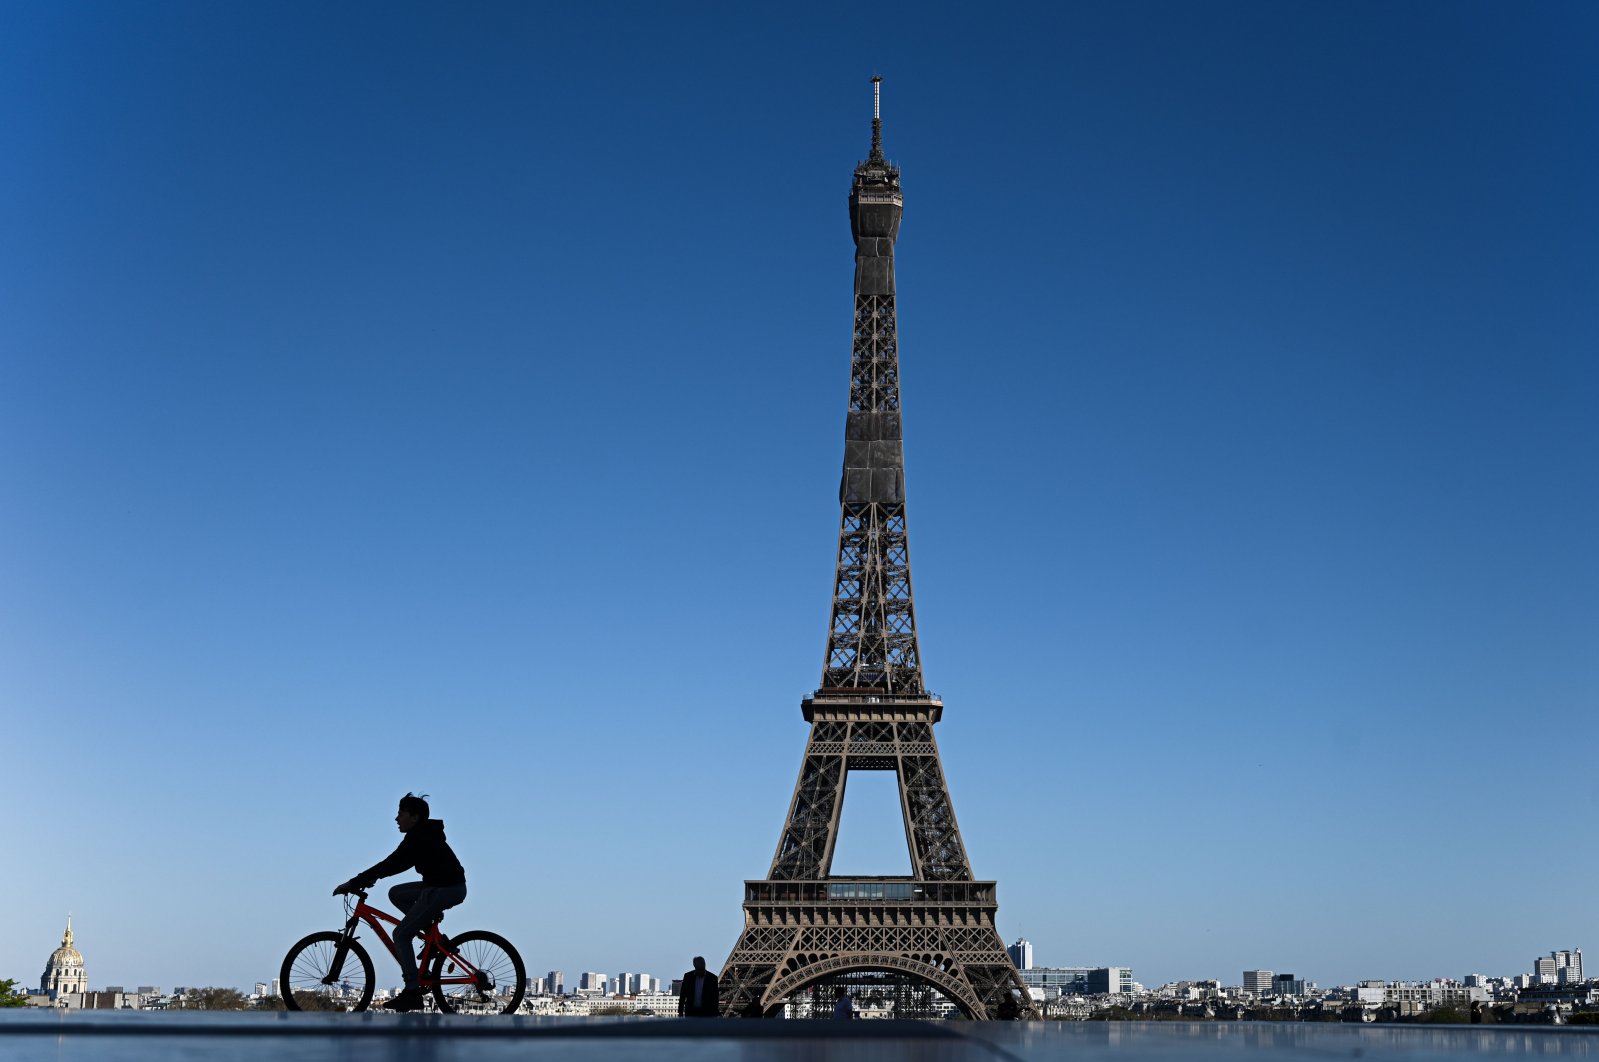 A boy rides his bicycle past the Eiffel Tower in Paris on Sunday, April 5, 2020, the 20th day of a lockdown in France aimed at curbing the spread of COVID-19. (AFP Photo)